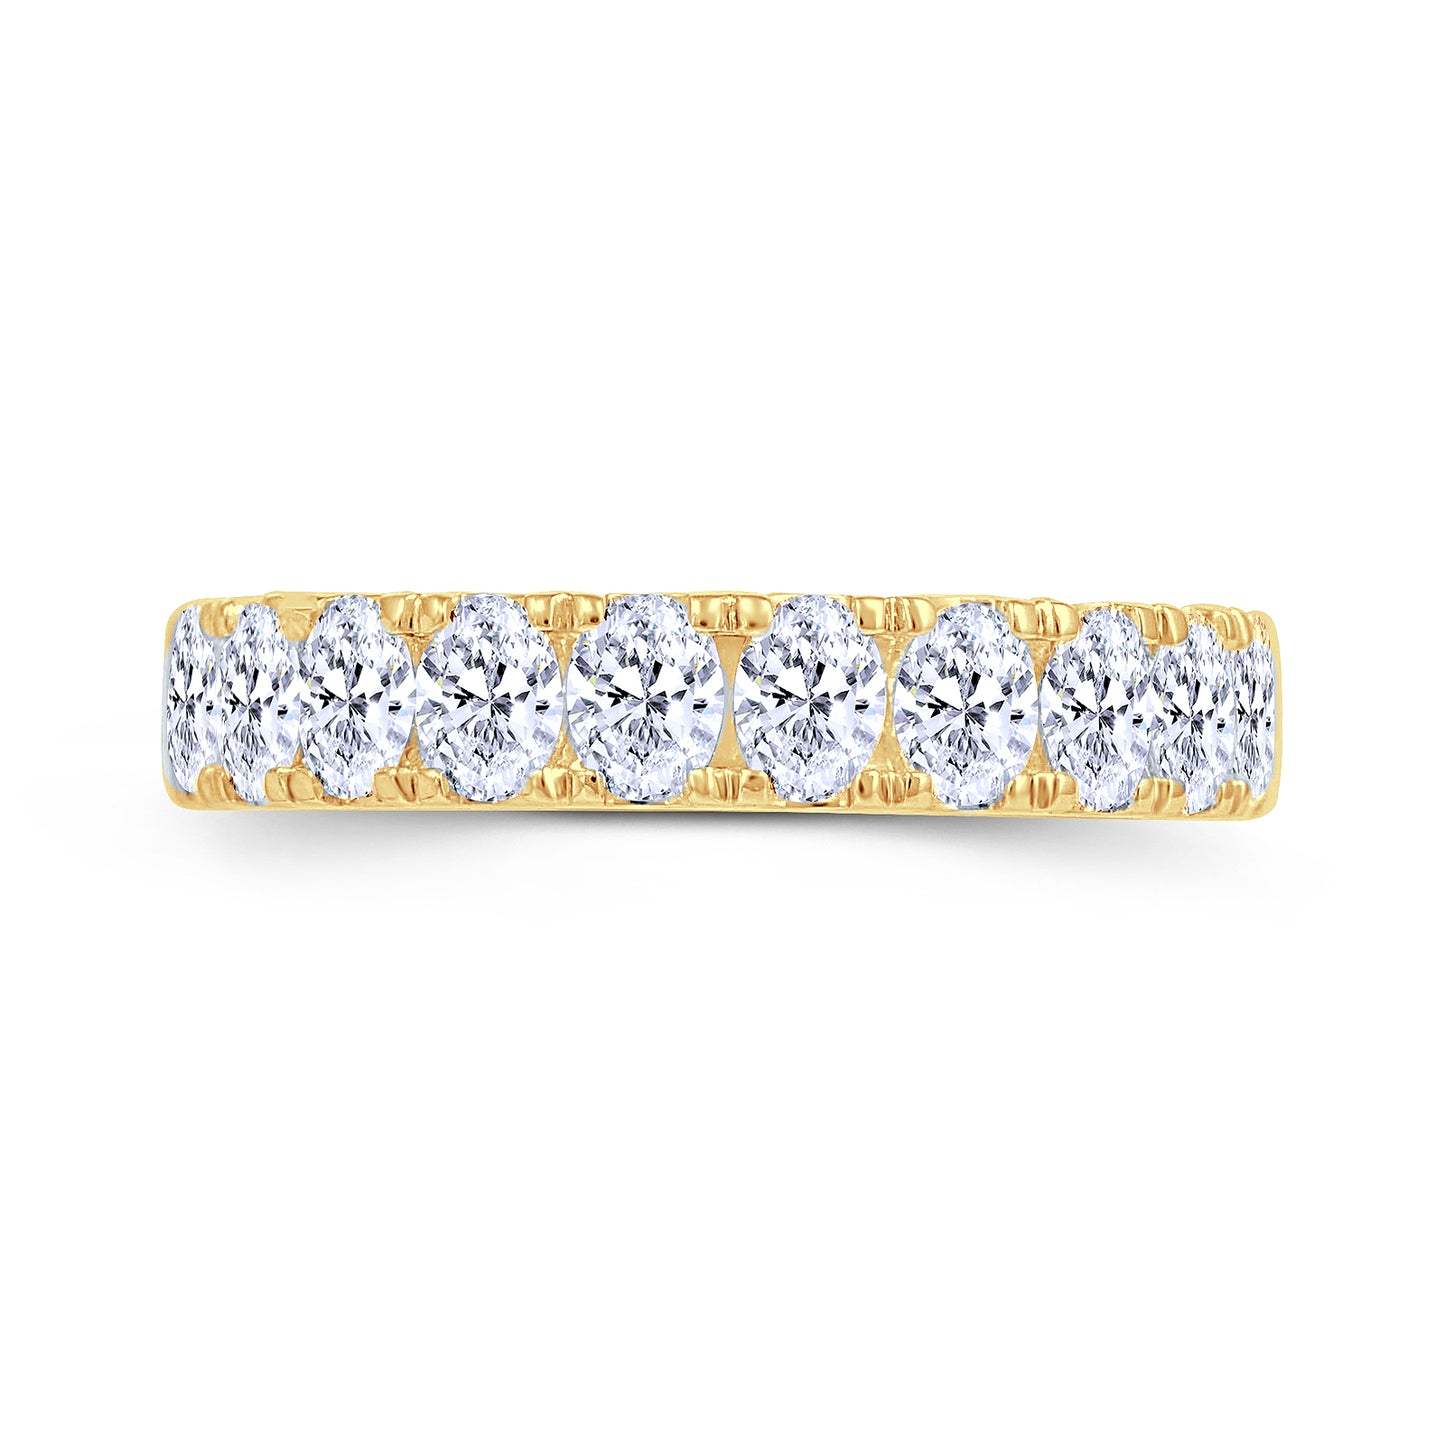 18ct Yellow Gold 50% Spread Oval Diamond Ring 0.75ct